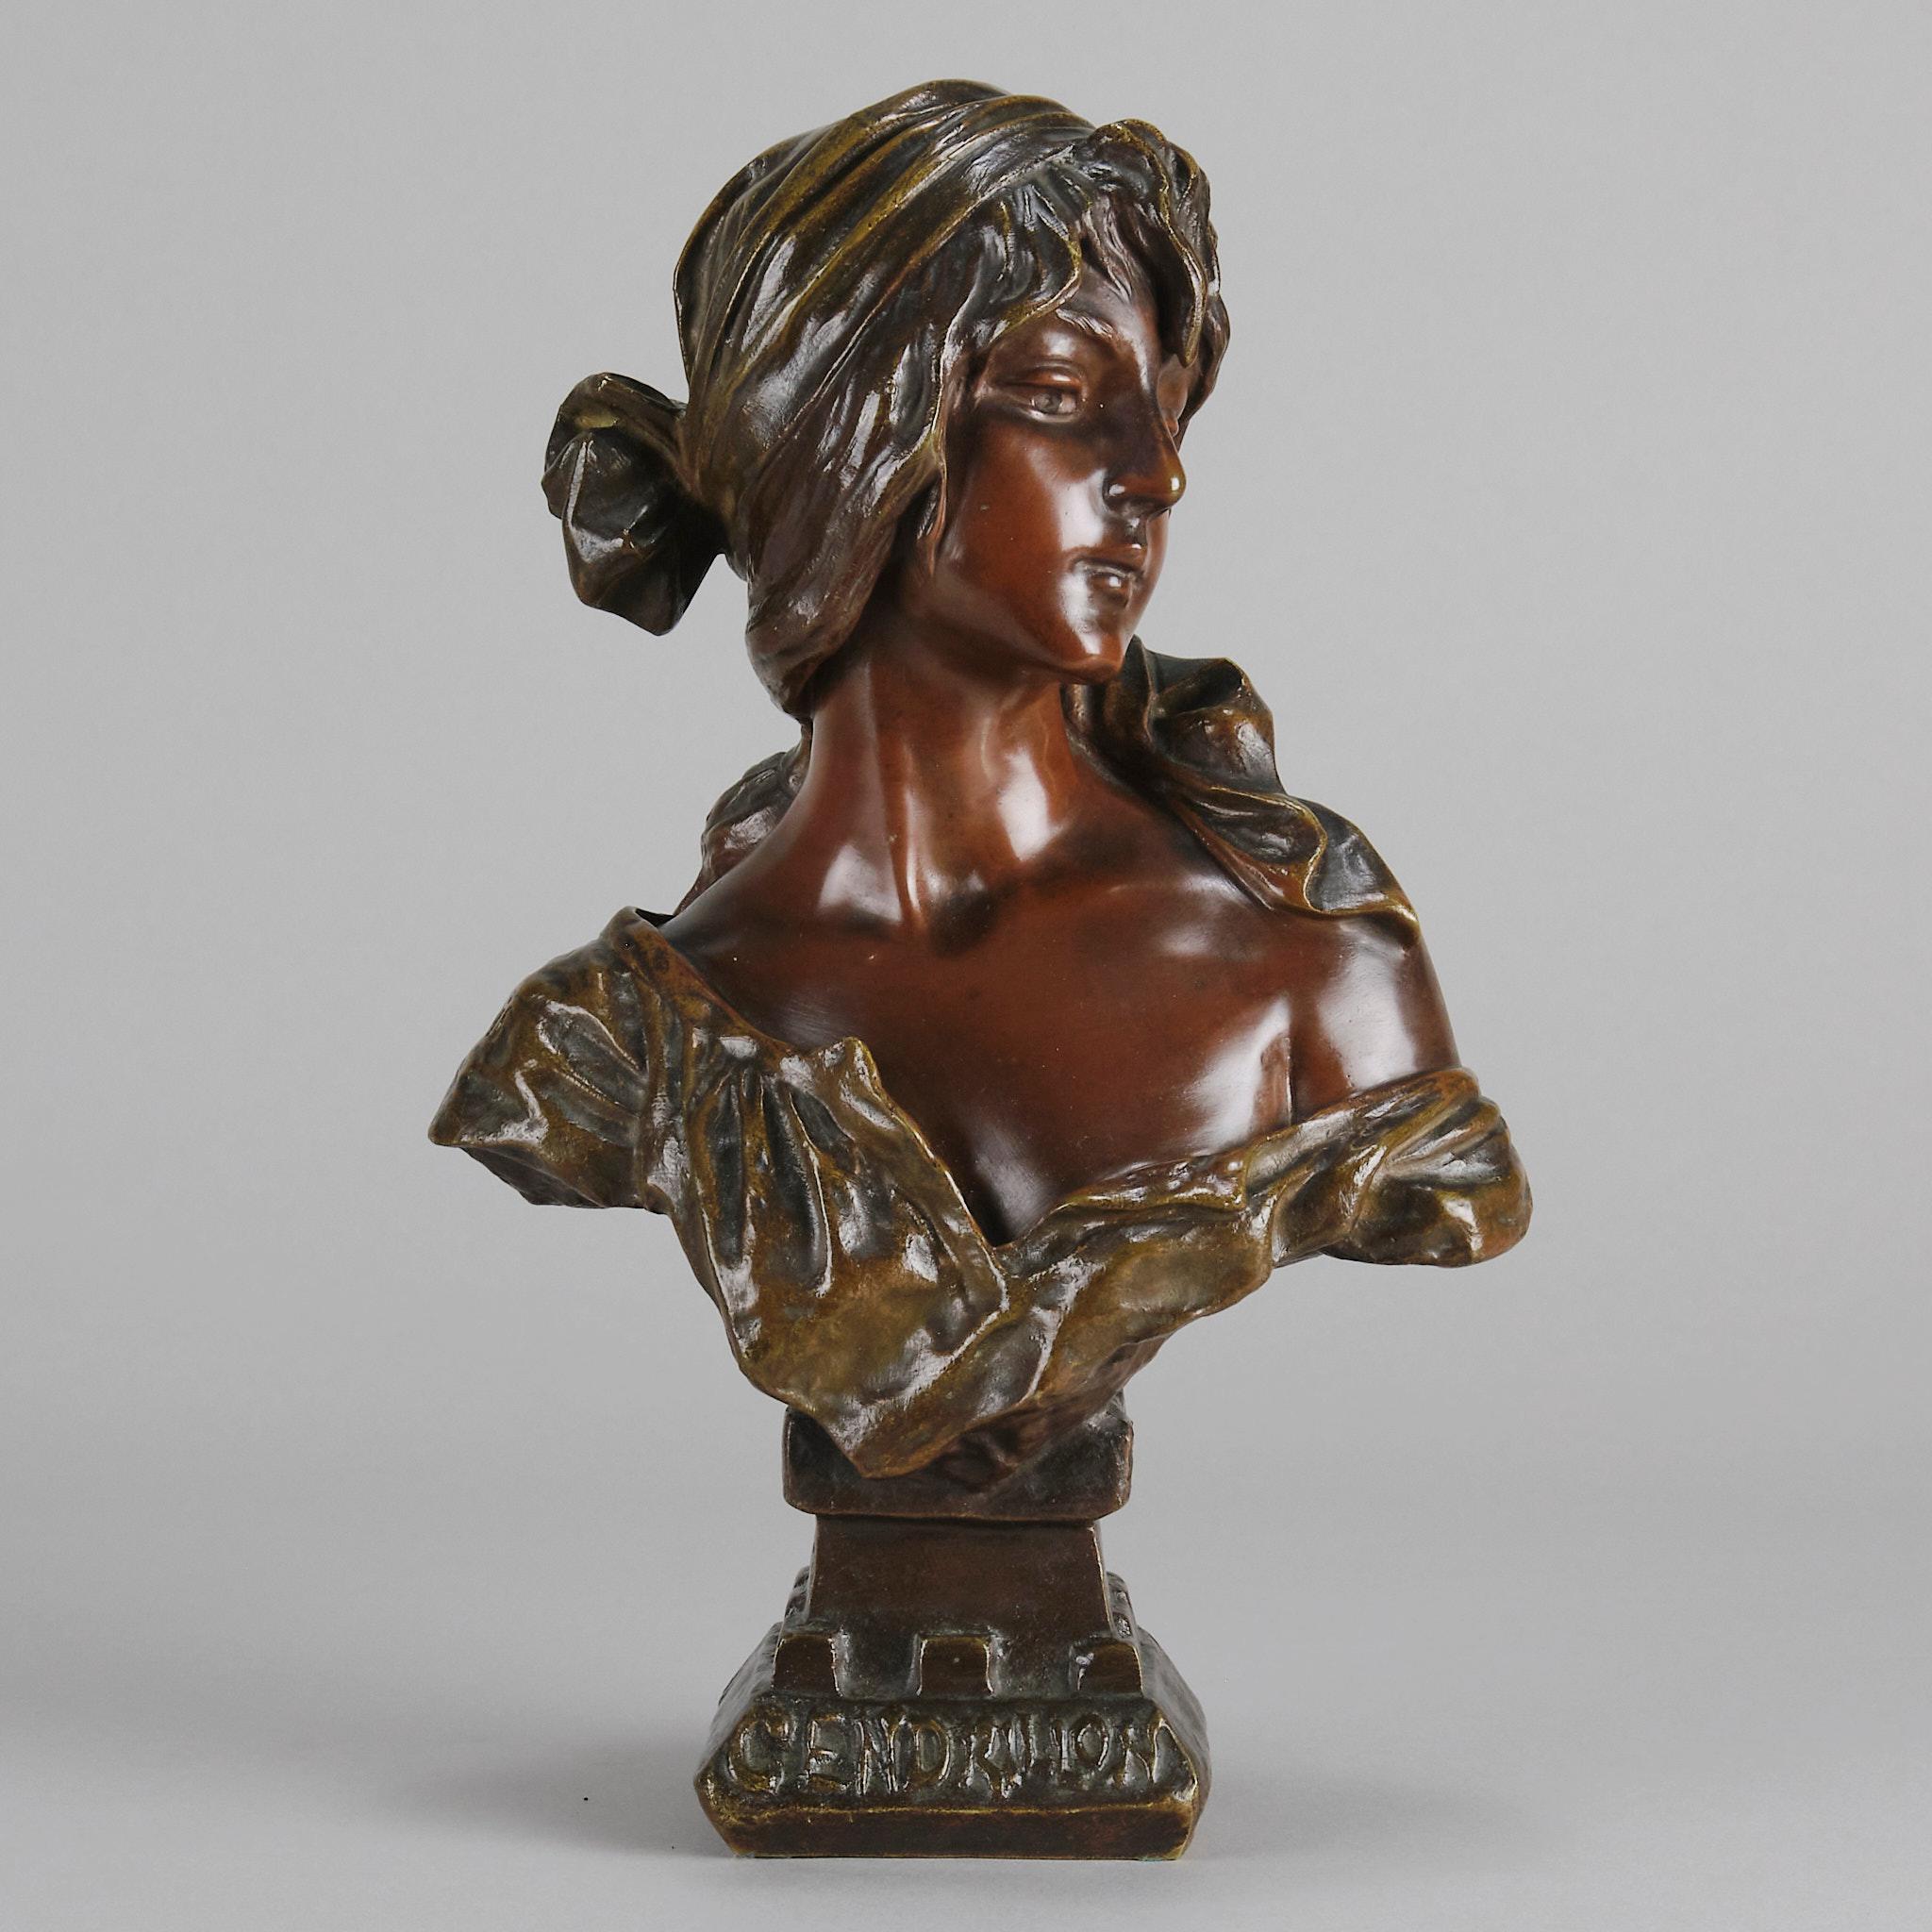 An attractive late 19th Century Art Nouveau French bronze bust exhibiting deep multi-hued patination and excellent detail. The beautiful character wearing a head dress and a loosely draped blouse representing ’Cinderella’ from the famous French